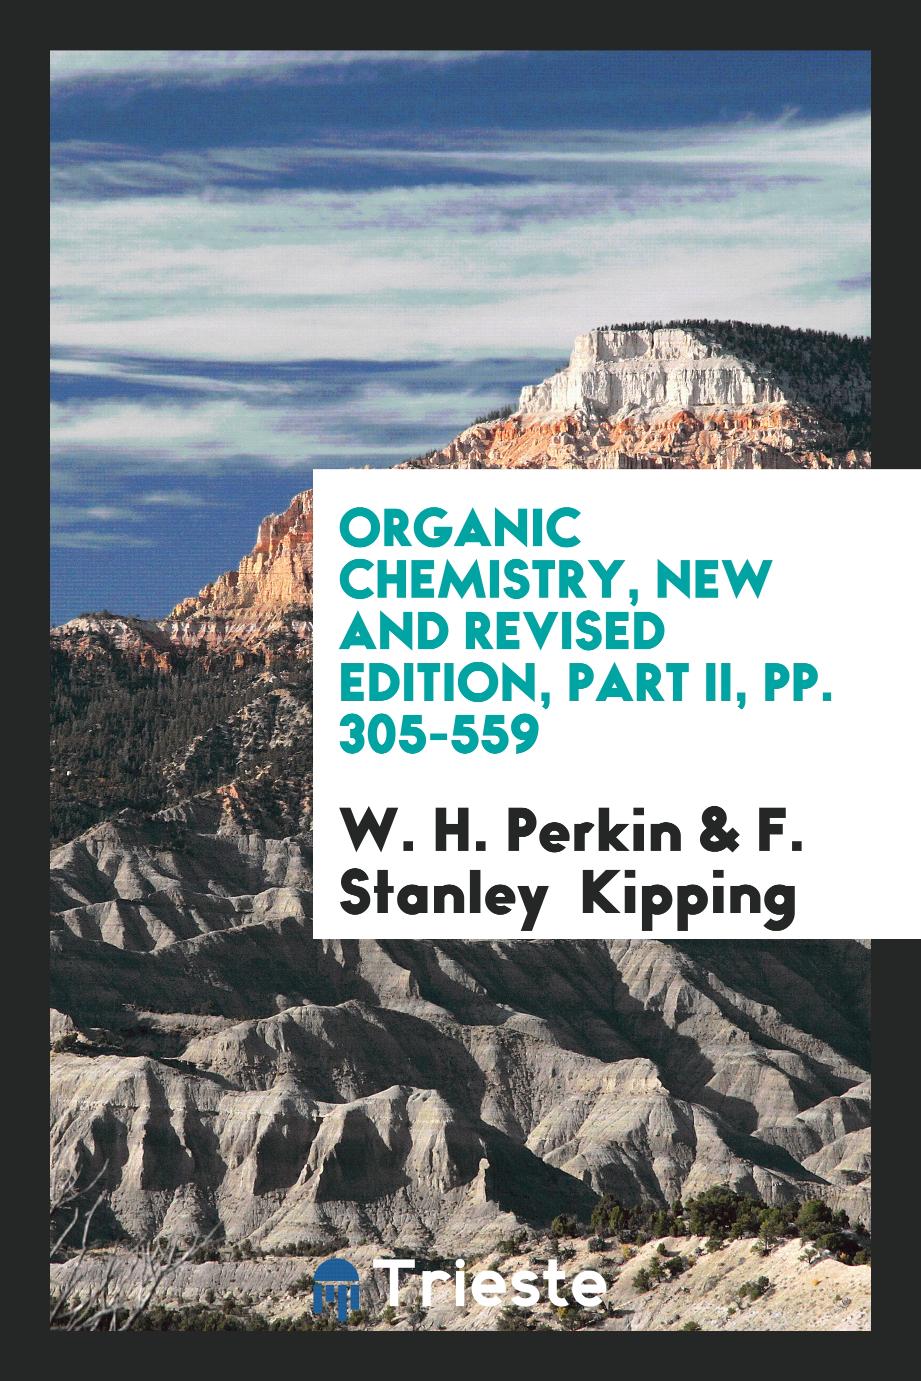 Organic Chemistry, New and Revised Edition, Part II, pp. 305-559